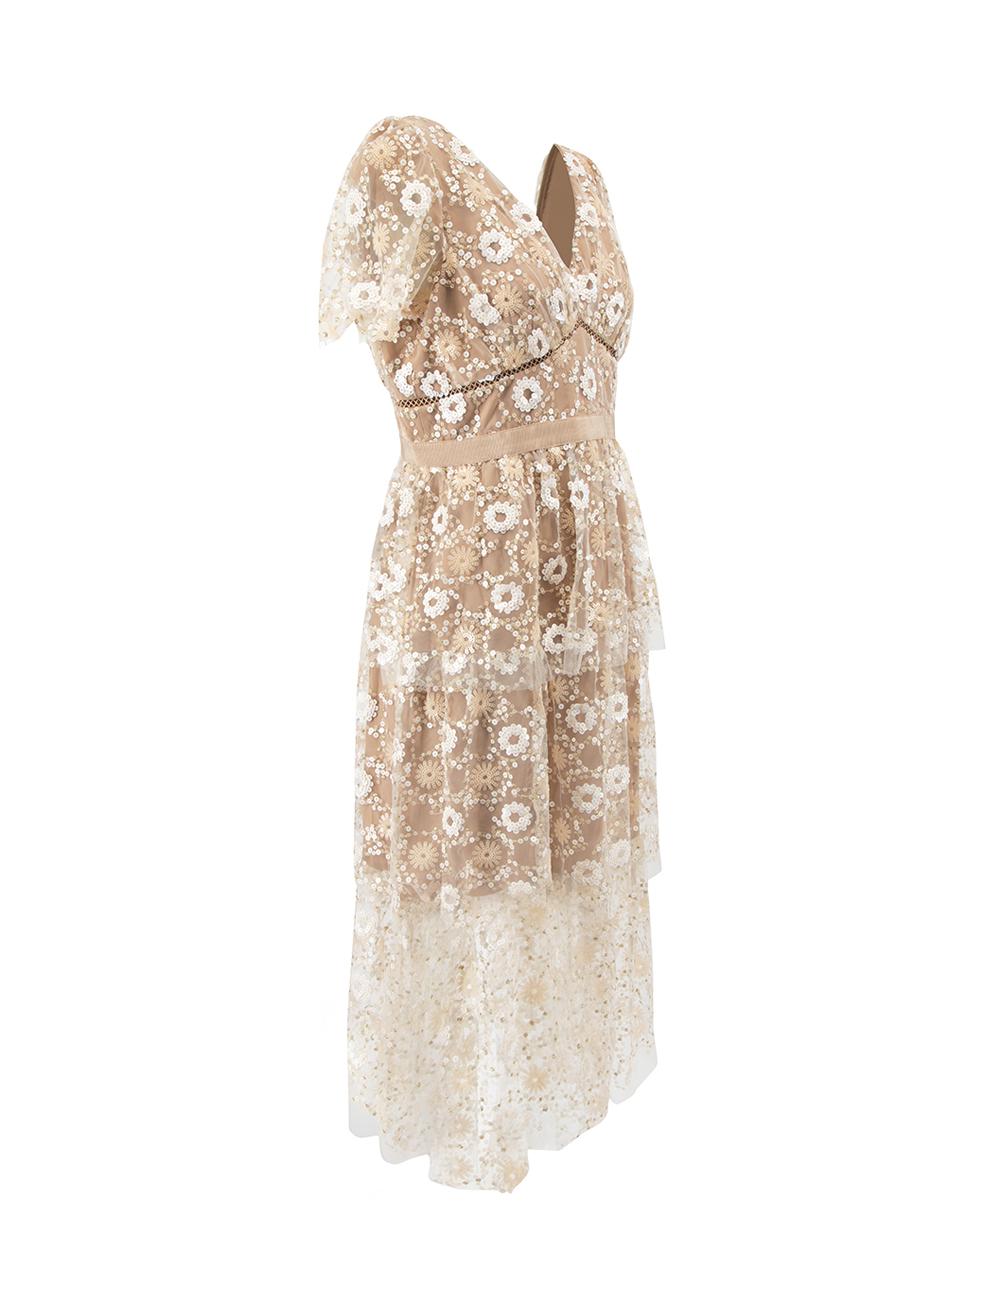 CONDITION is Never worn, with tags. No visible wear to dress is evident on this new Self-Portrait designer resale item.
  
  Details
  Beige
  Lace
  Midi tiered dress
  Sequinned accent
  V neckline
  Sheered short puff sleeves
  Back zip closure